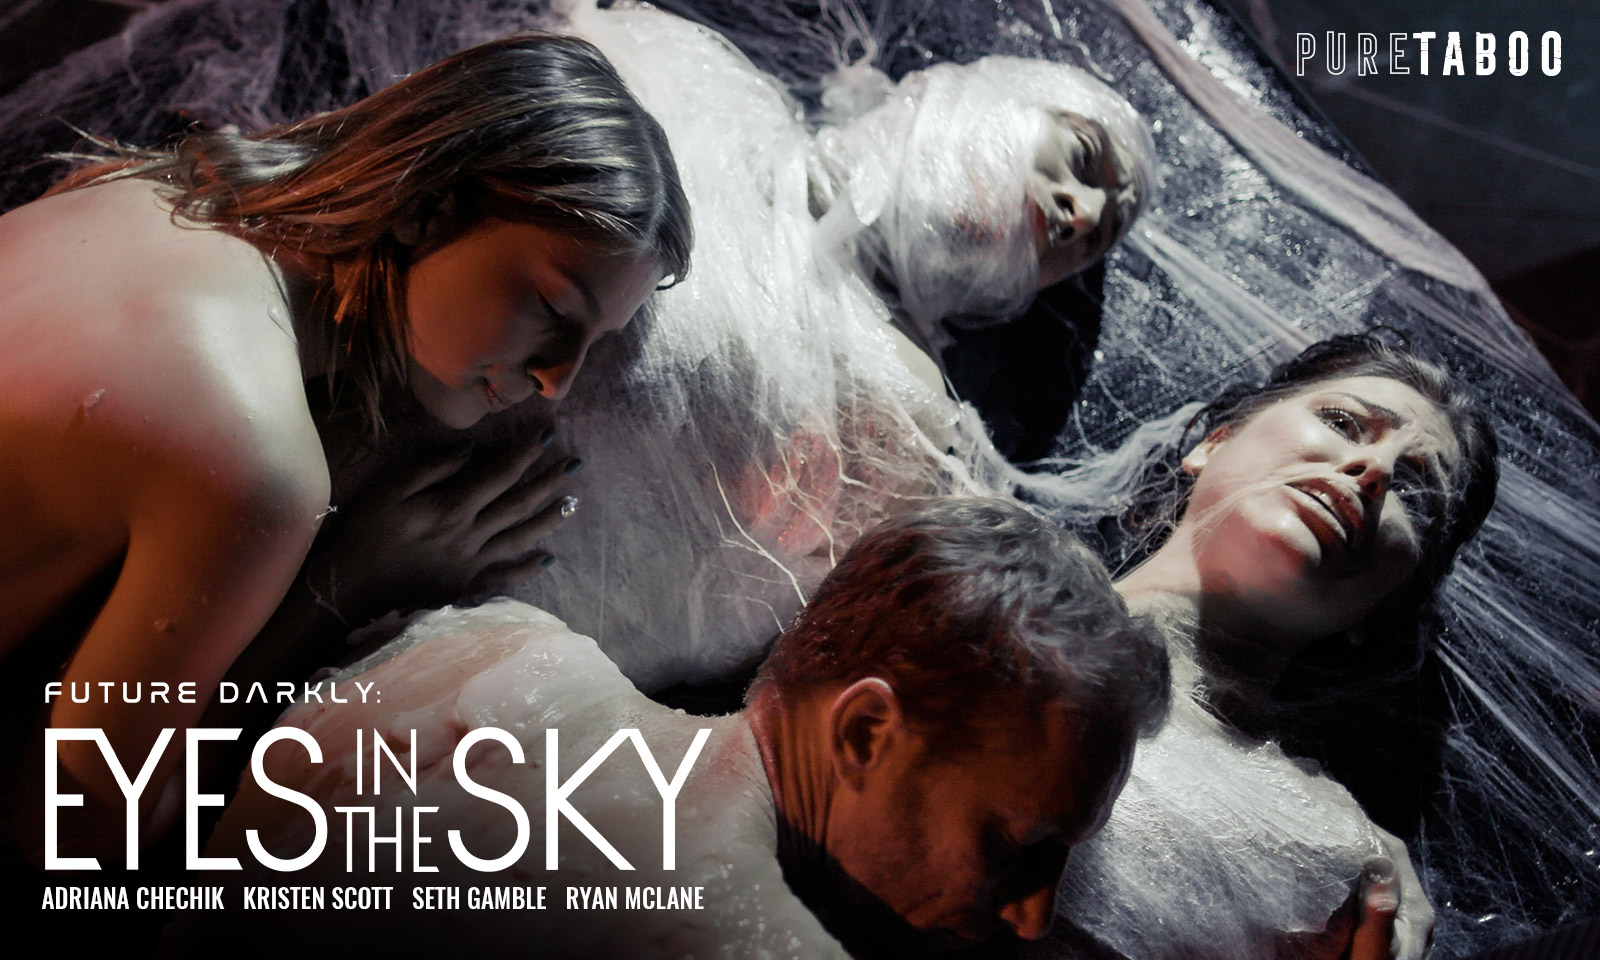 1600px x 960px - Adriana Chechik is Abducted by Aliens in 'Eyes in the Sky' | AVN